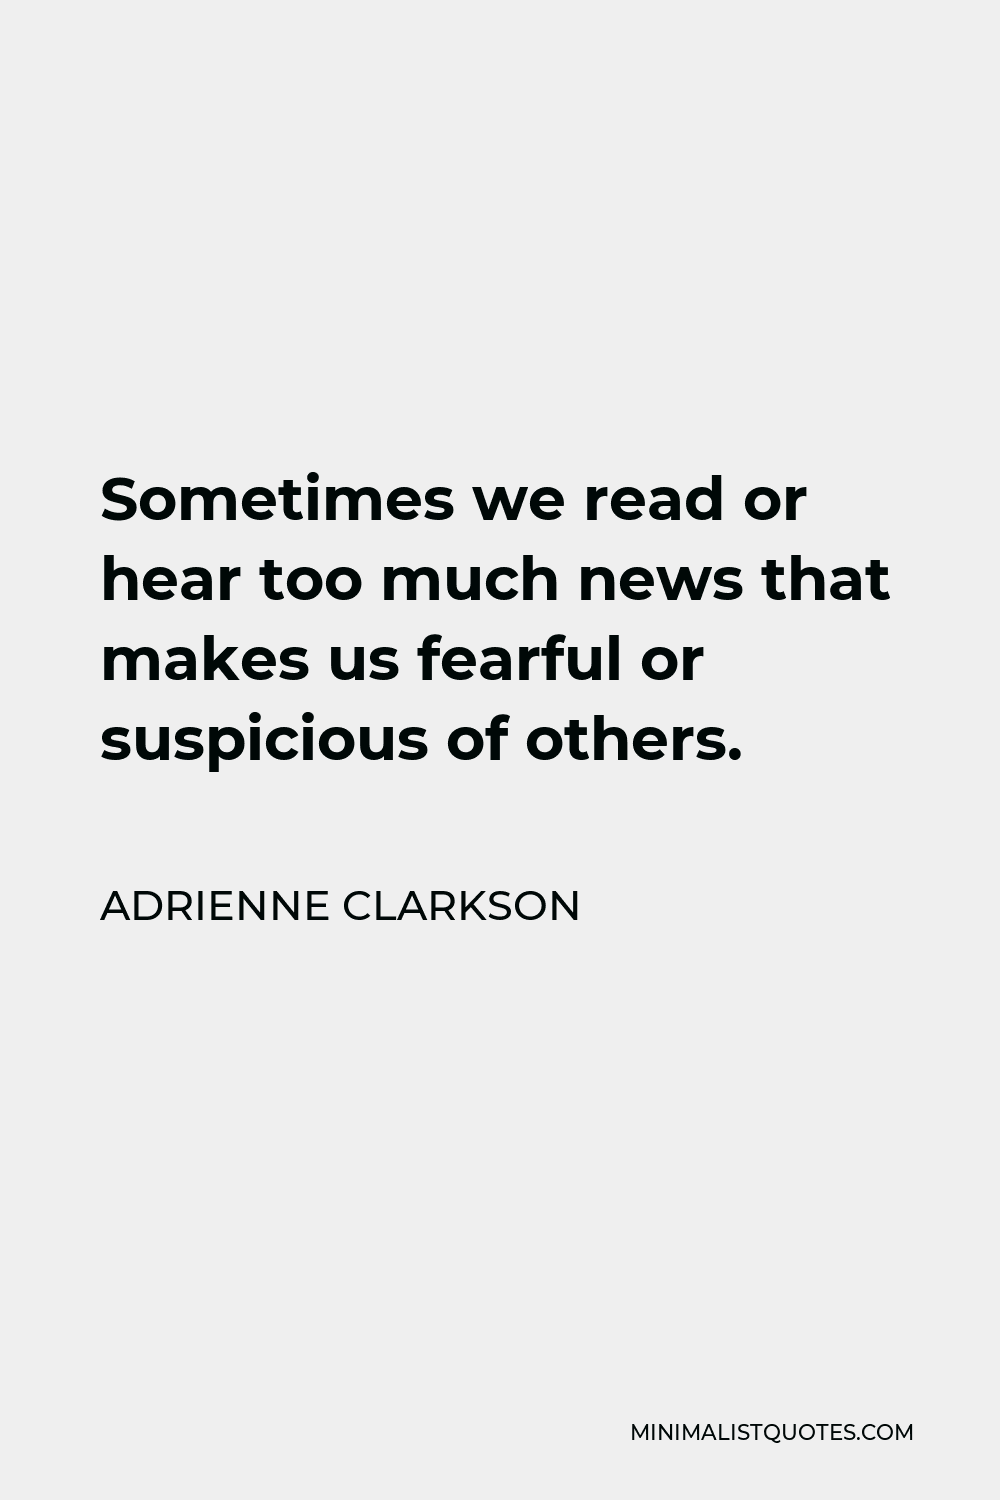 Adrienne Clarkson Quote - Sometimes we read or hear too much news that makes us fearful or suspicious of others.